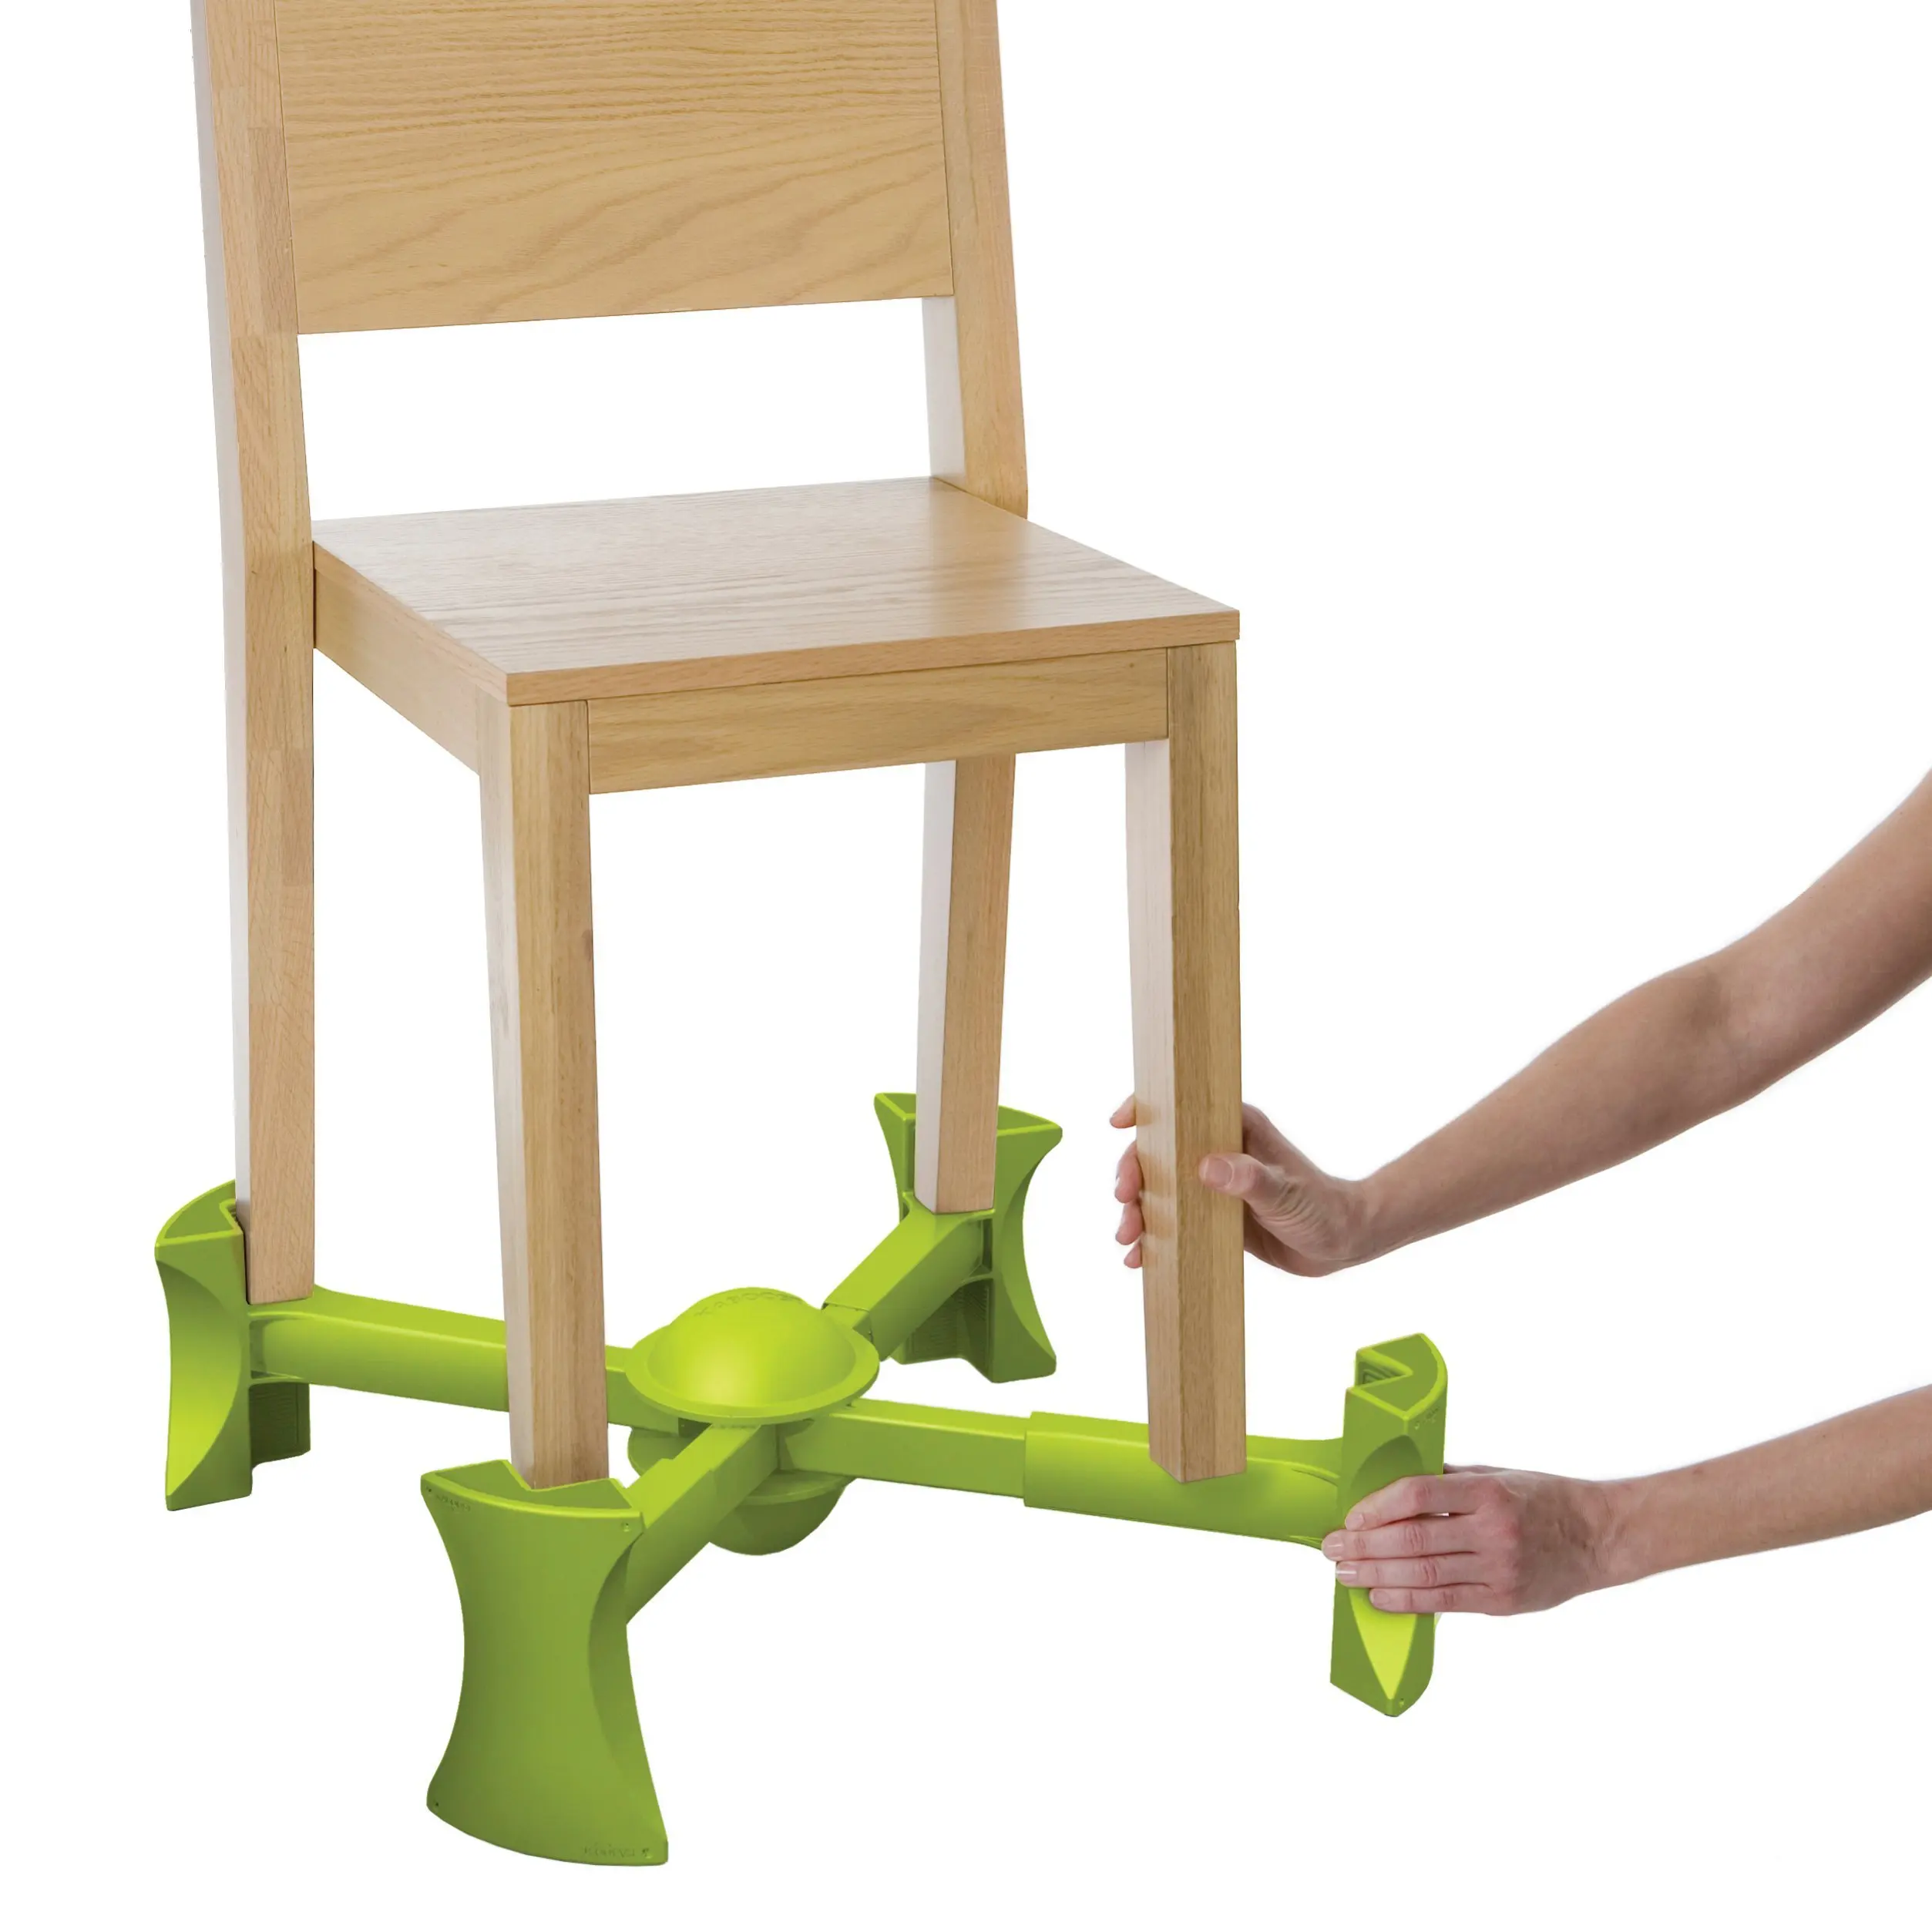 Buy Kaboost Booster Seat for Dining, Green – Goes Under the Chair